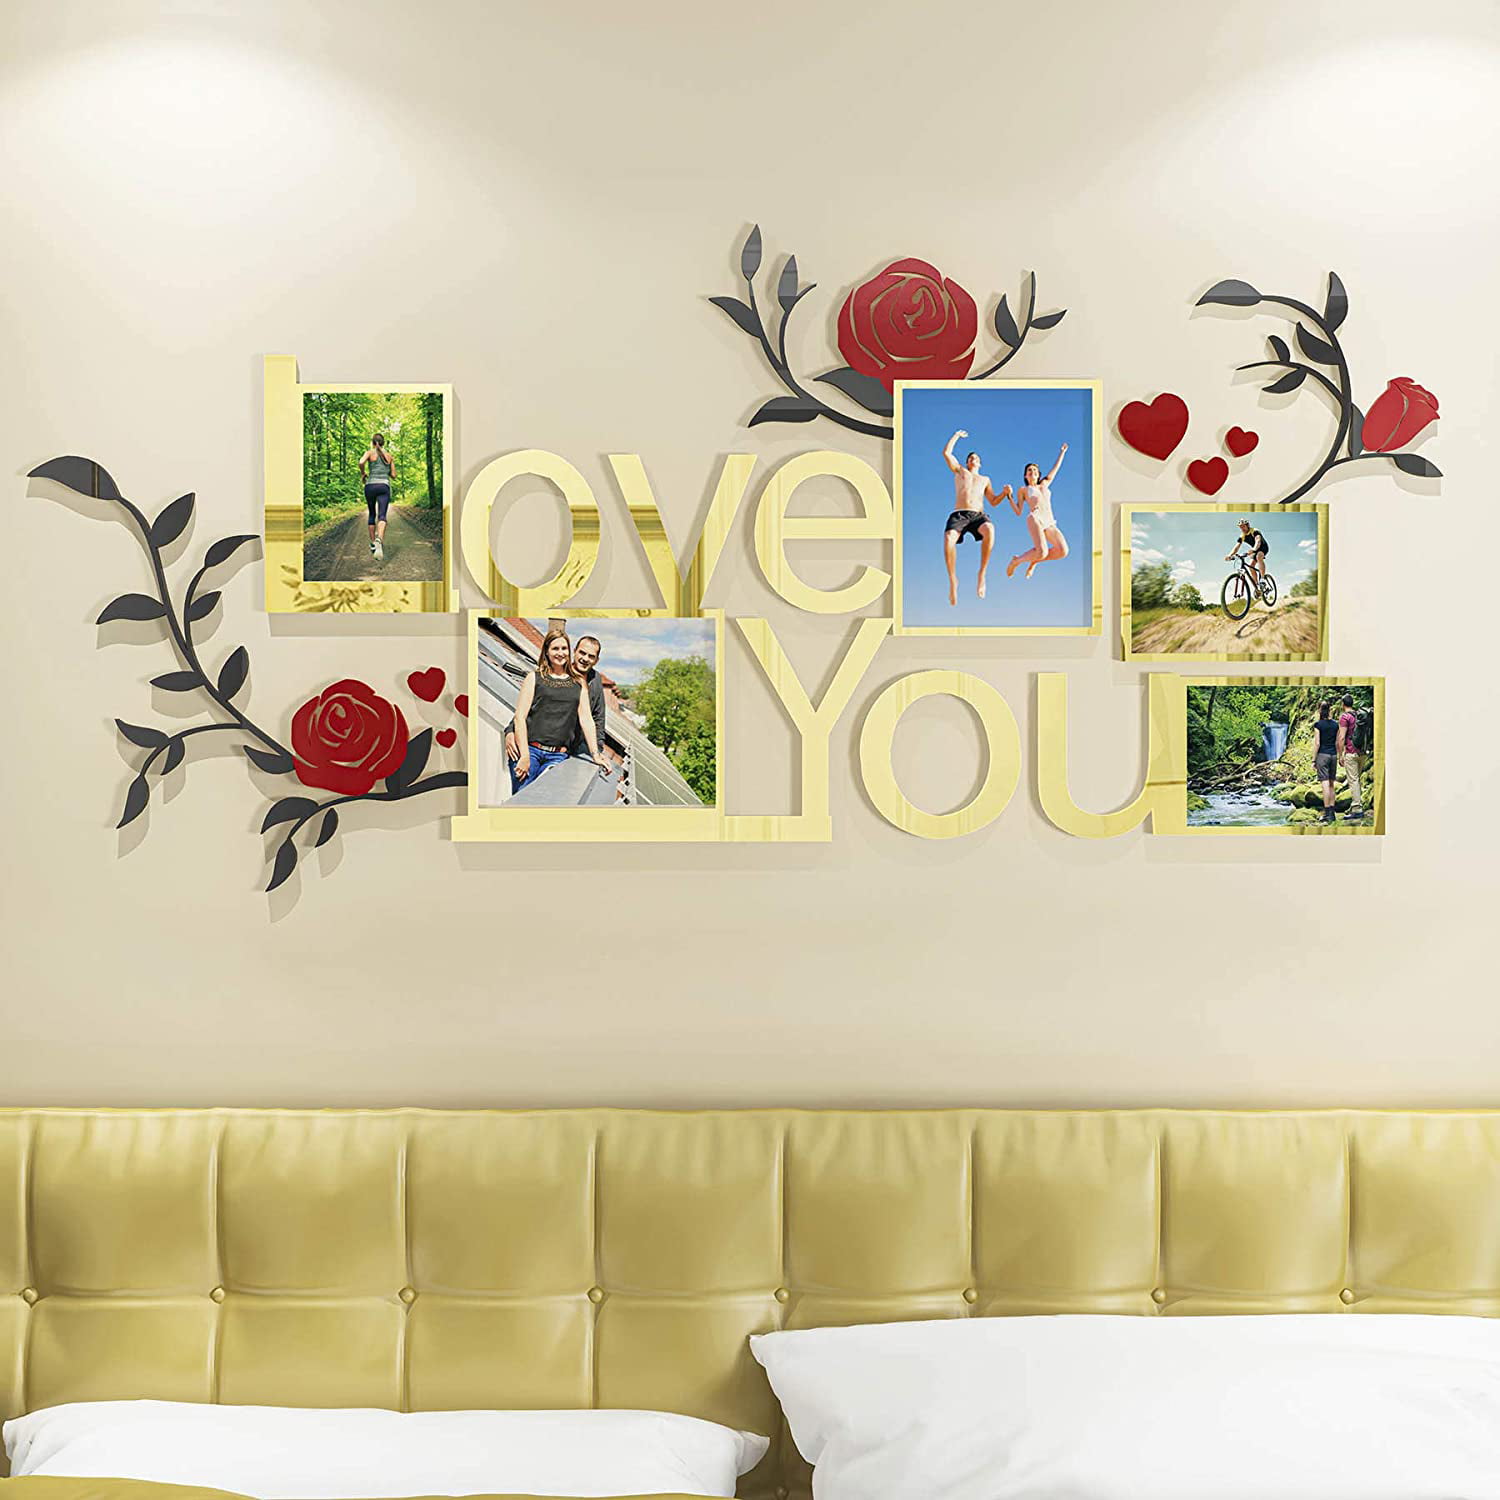 Buy Graffiti 3D Wall Decal Love Smashed Wall Tattoo Decal Boys Bedroom  Decor Wall Stickers Mural